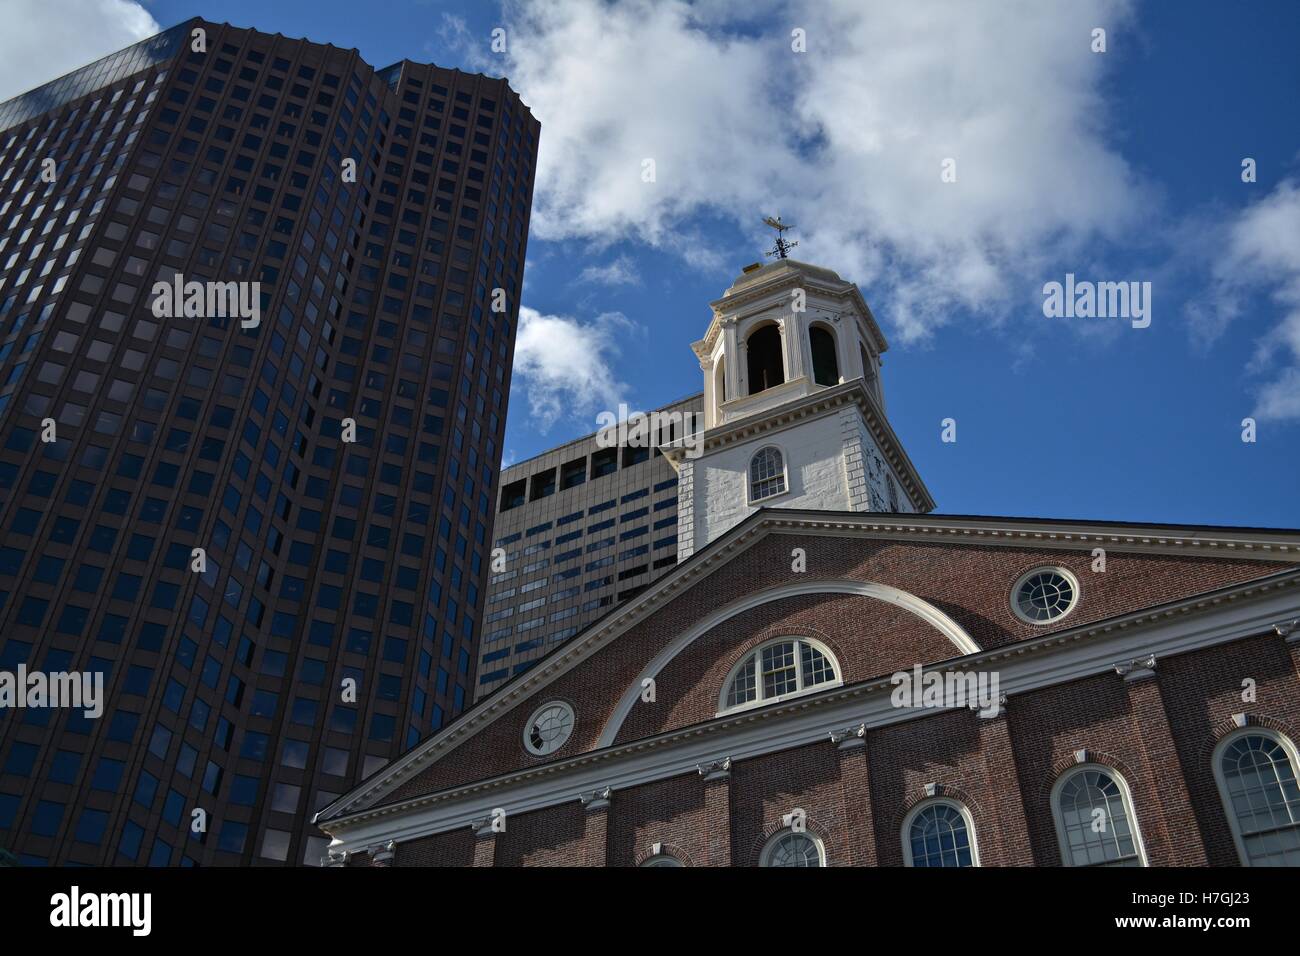 Faneuil Hall market along side Quincy Market and the Freedom Trail in downtown Boston, Massachusetts. Stock Photo